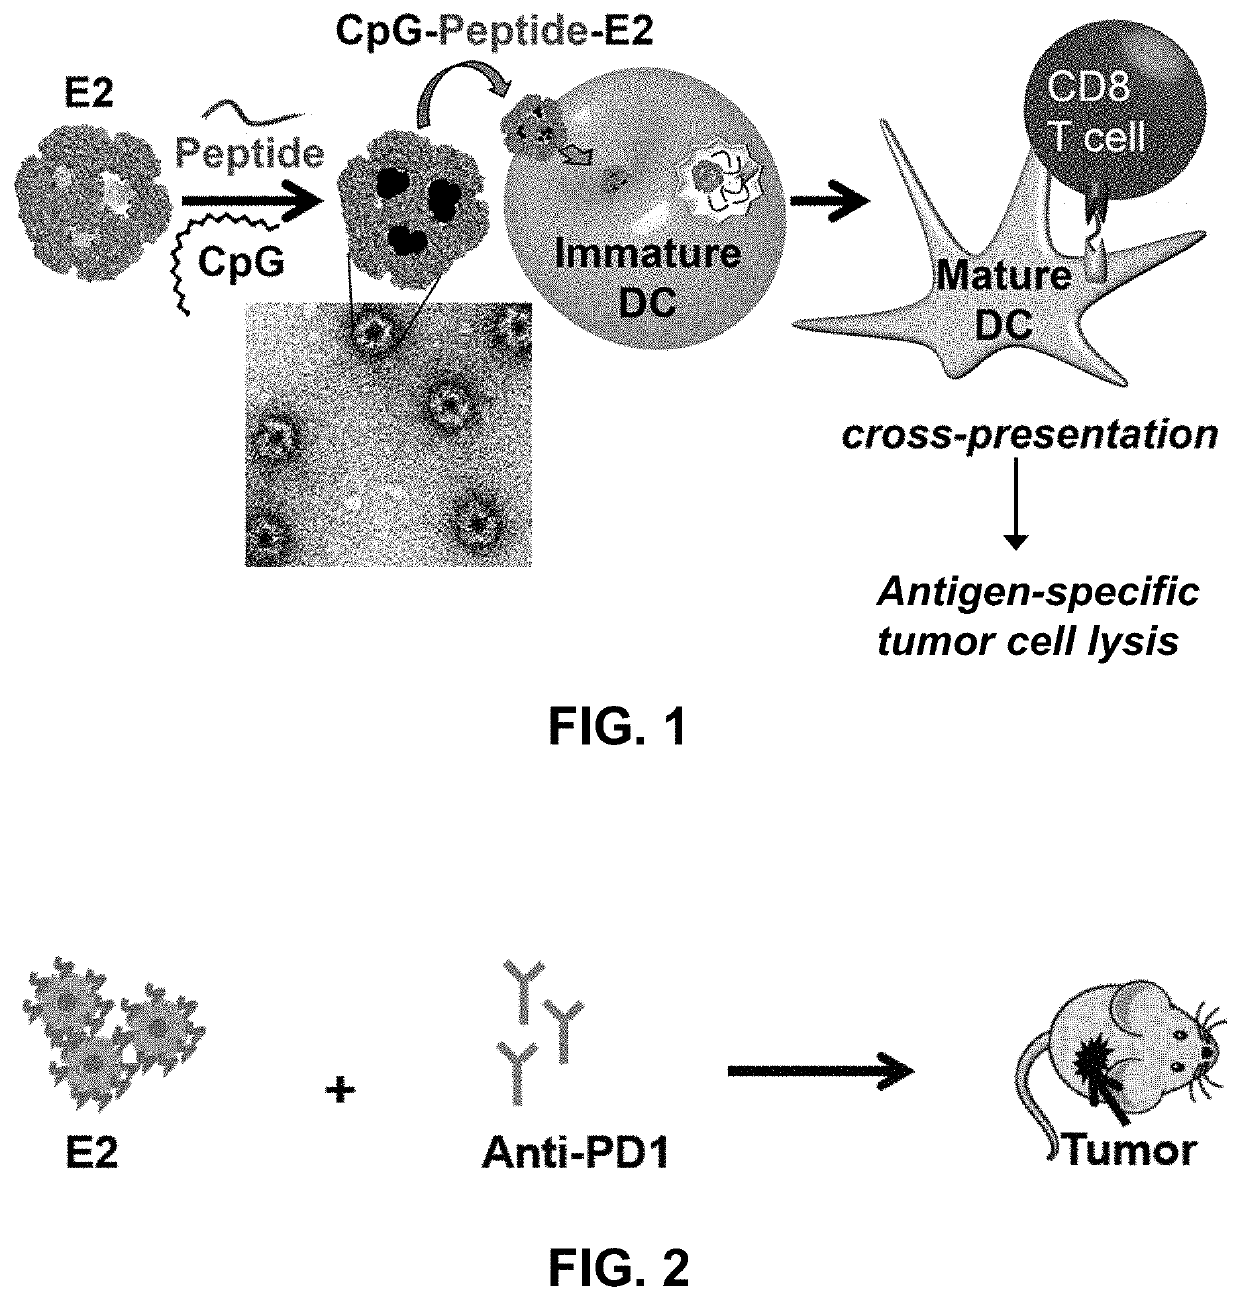 Protein nanoparticles and combination therapy for cancer immunotherapy